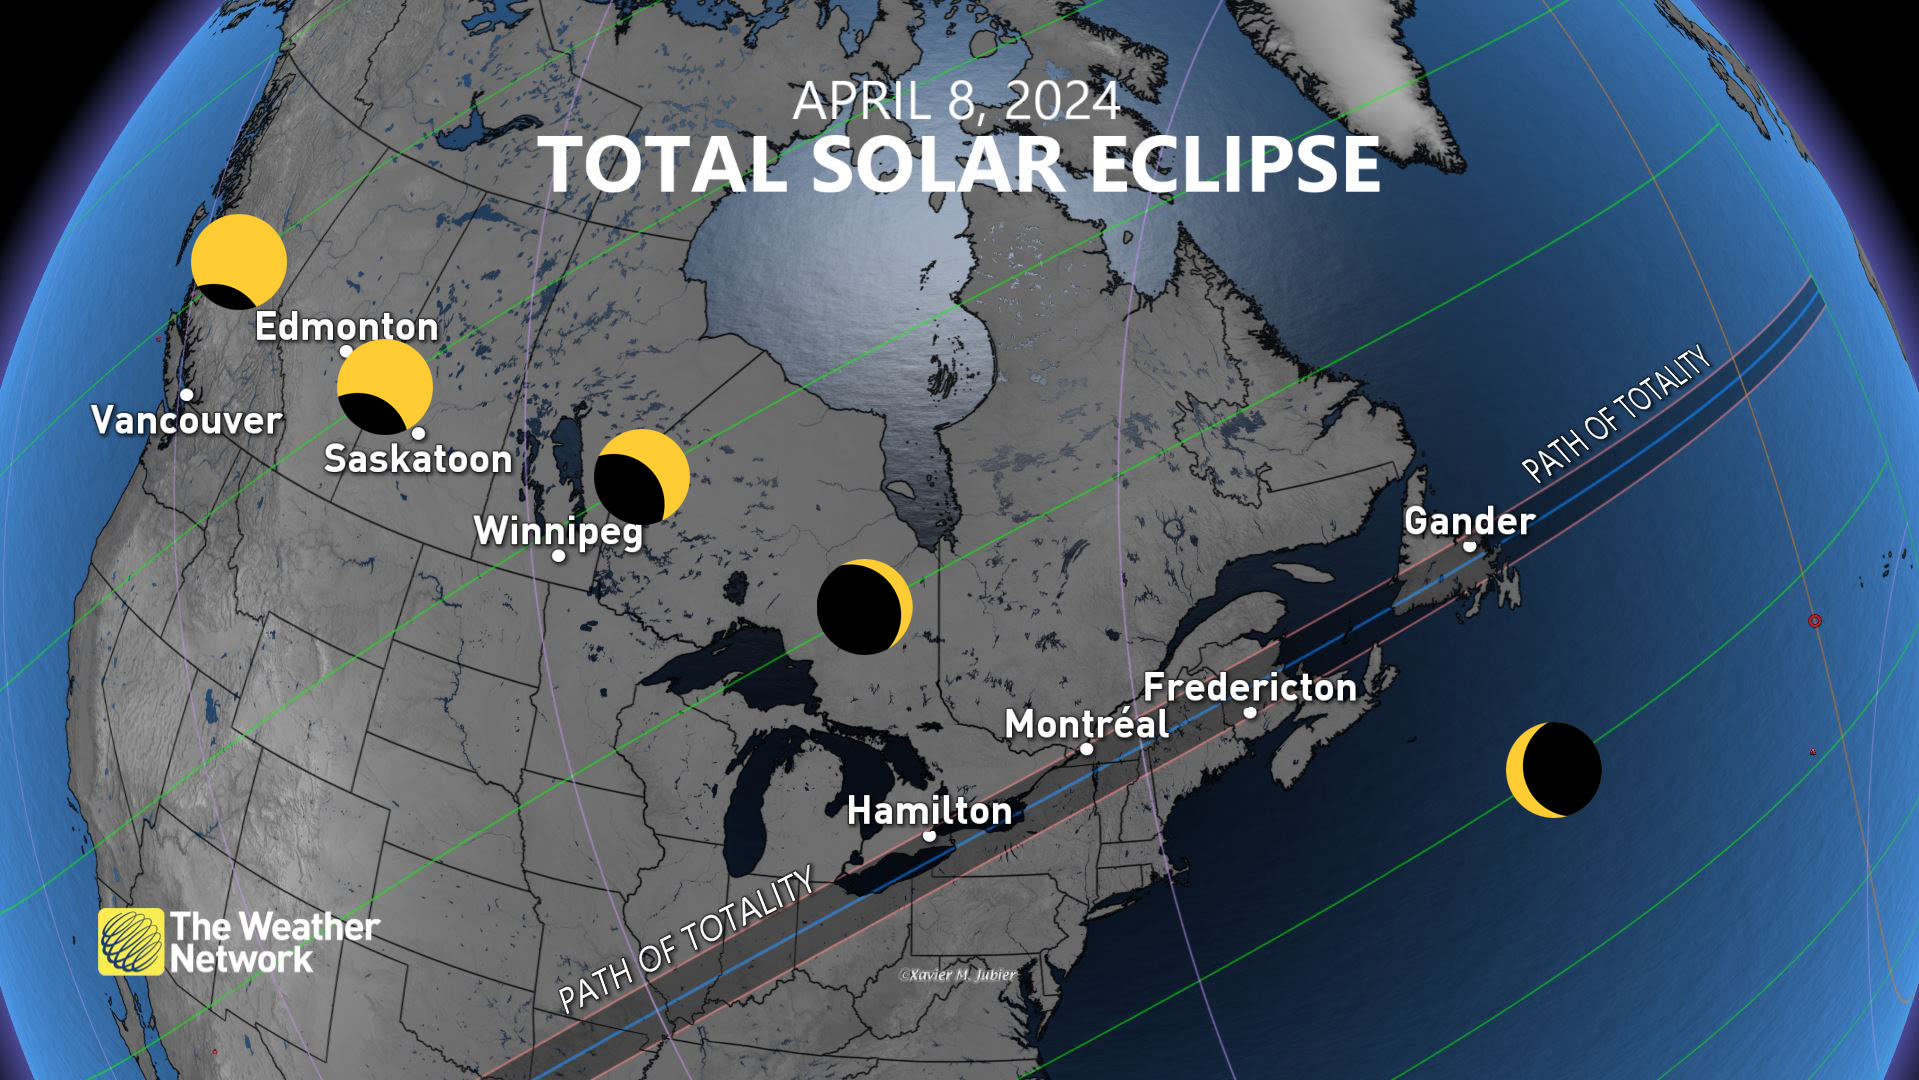 Canada's next Total Solar Eclipse is two years from today. Are you